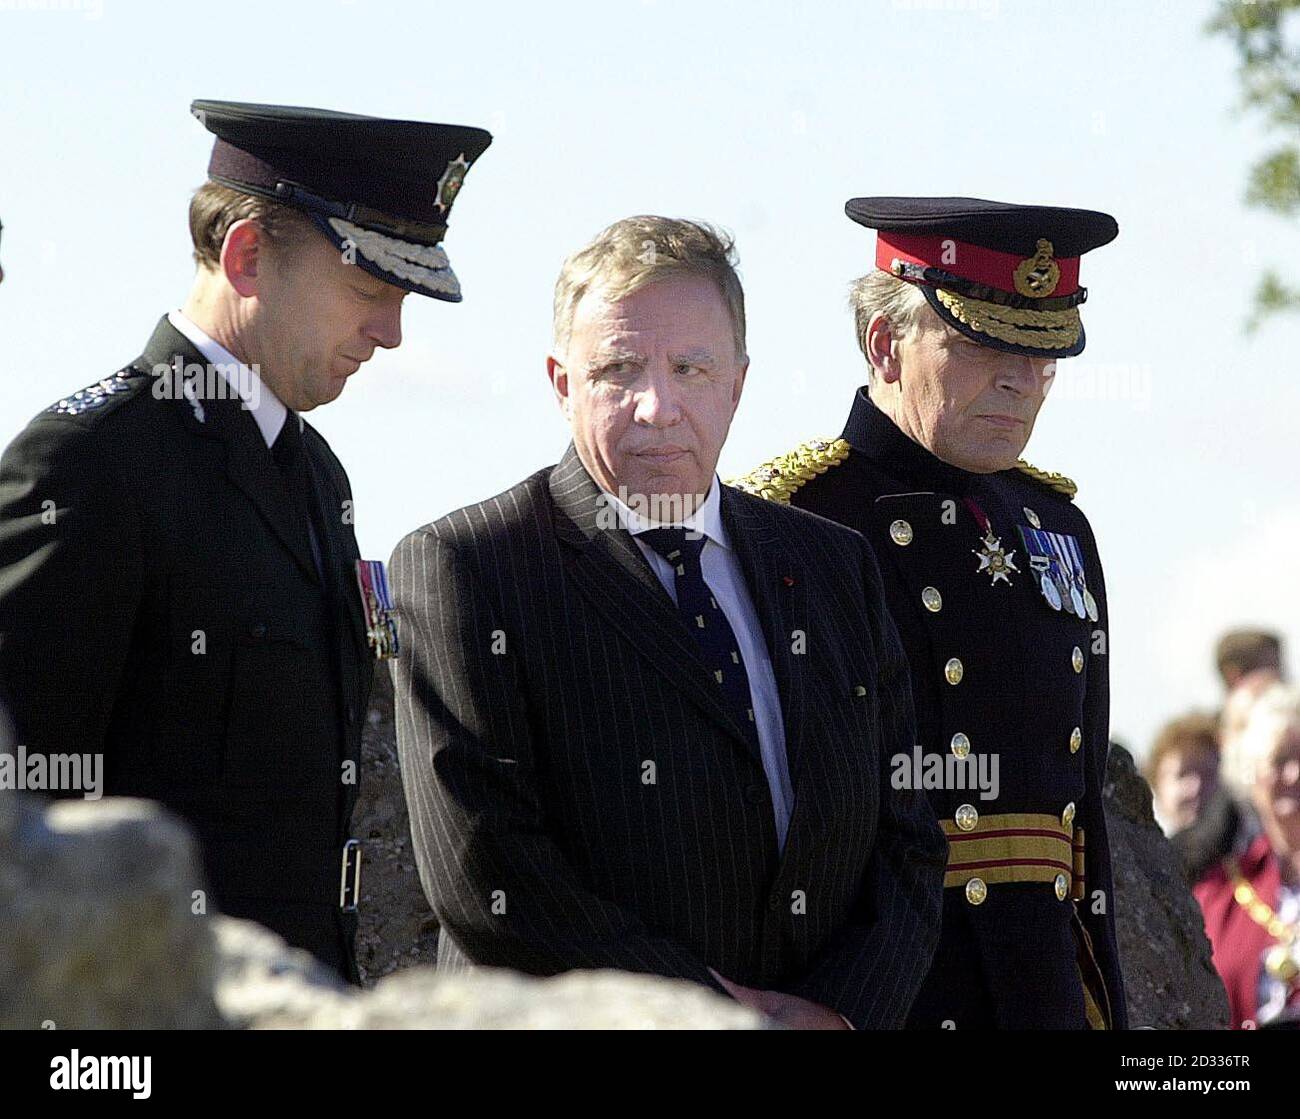 Secretary of State for Northern Ireland Paul Murphy, flanked by Chief Constable Hugh Orde of the police service of Northern Ireland (left) and Lt General Philip Trousdell, General Officer Commanding in Northern Ireland, at the National Memorial Arboretum near Lichfield, Staffordshire, Tuesday September 23, 2003. The site, a stone circle and monolith surrounded by 719 trees - one for each person killed - commemorates servicemen and women, members of the Royal Ulster Constabulary and prison service and others in service of the Crown who have been killed in Northern Ireland between 1969 and 2001. Stock Photo